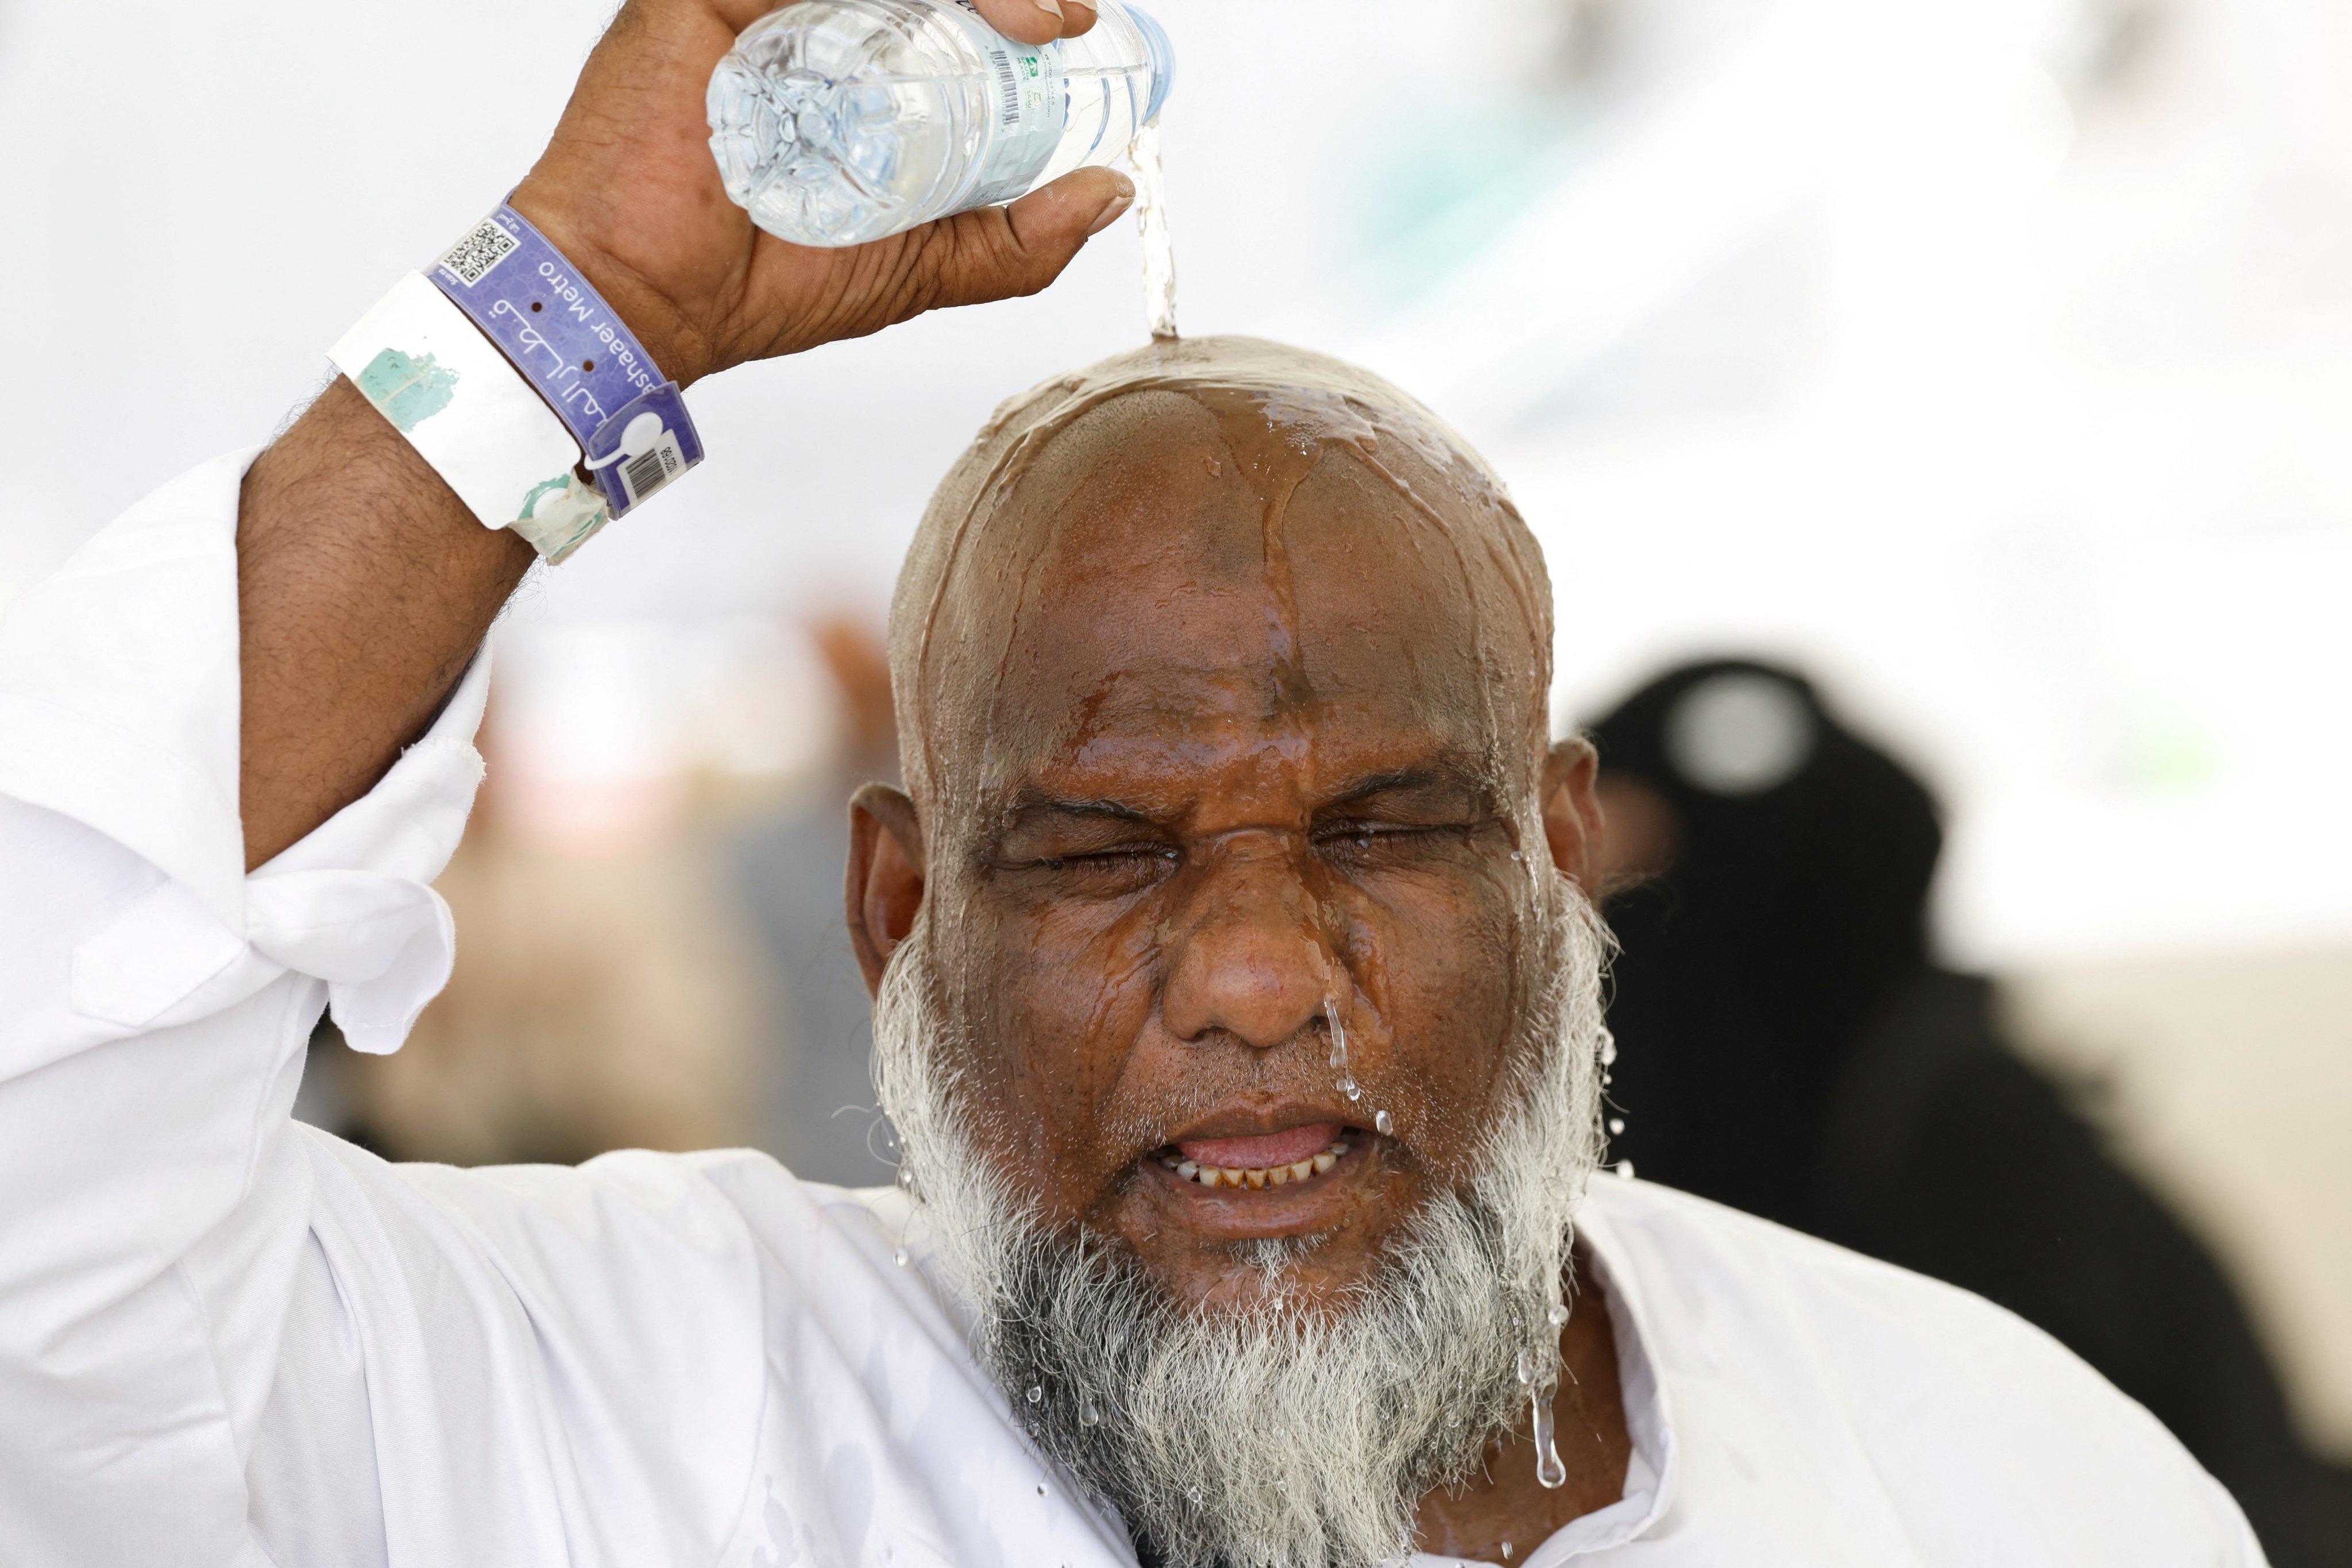 A pilgrim pours water on his head to cool down from the extreme heat during this year’s haj. Photo: Reuters